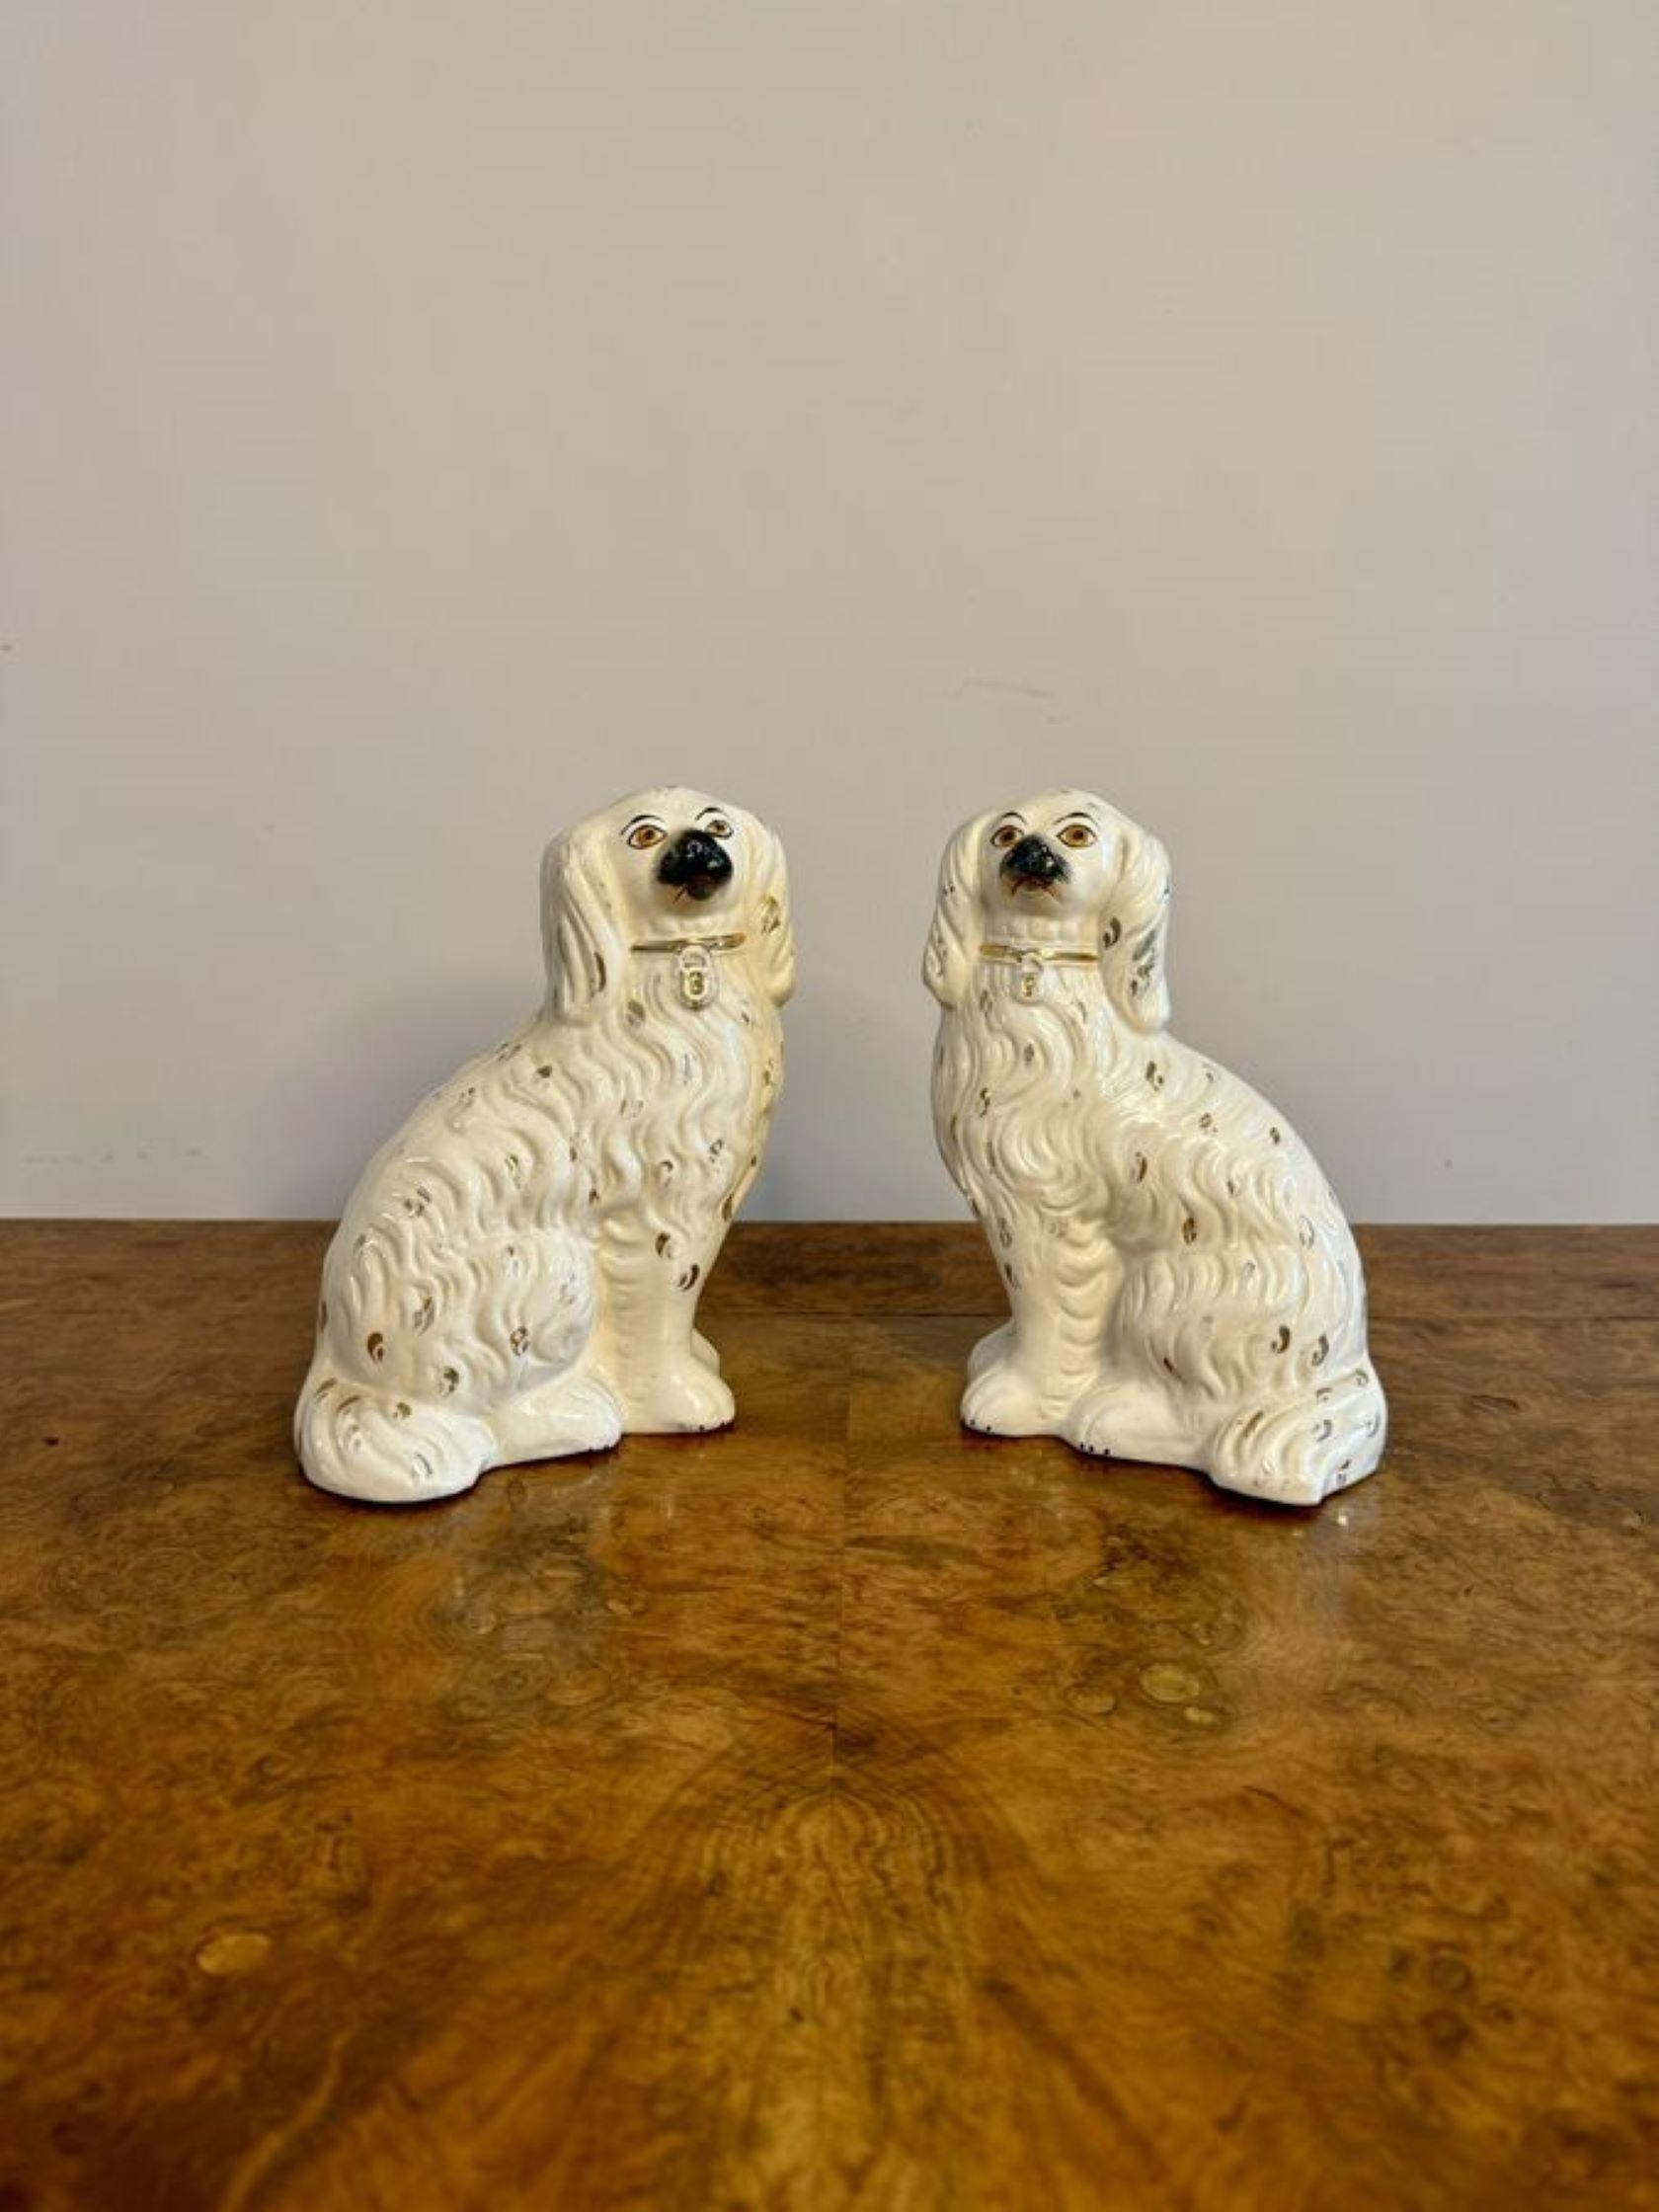 Pair of antique Victorian Staffordshire dogs, having a pair of seated spaniels in white and gold coloured coats with matching collars and padlocks.

D. 1880